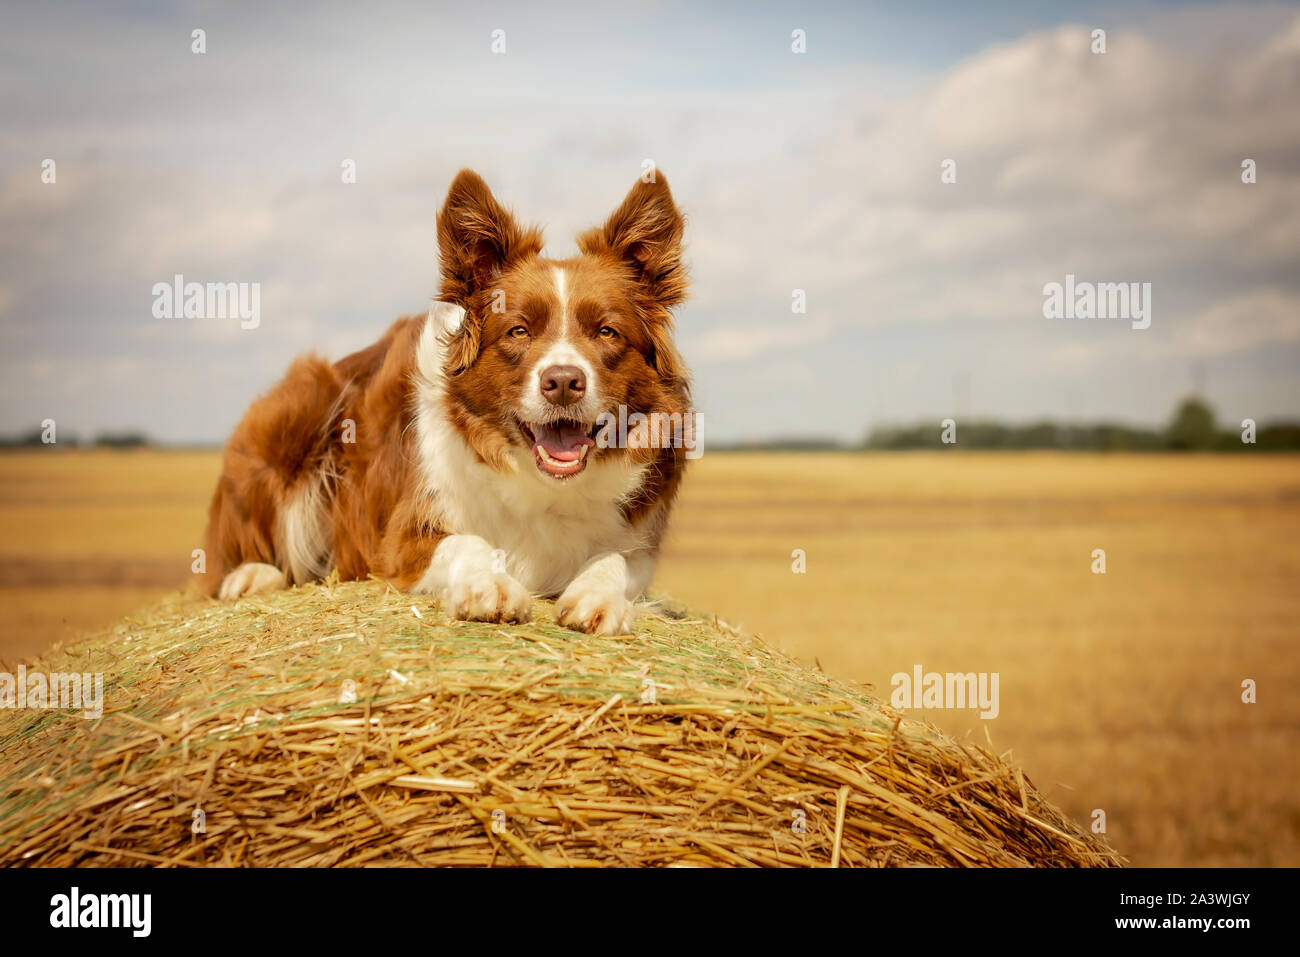 Red and White Border Collie Laying on Straw Bale Stock Photo